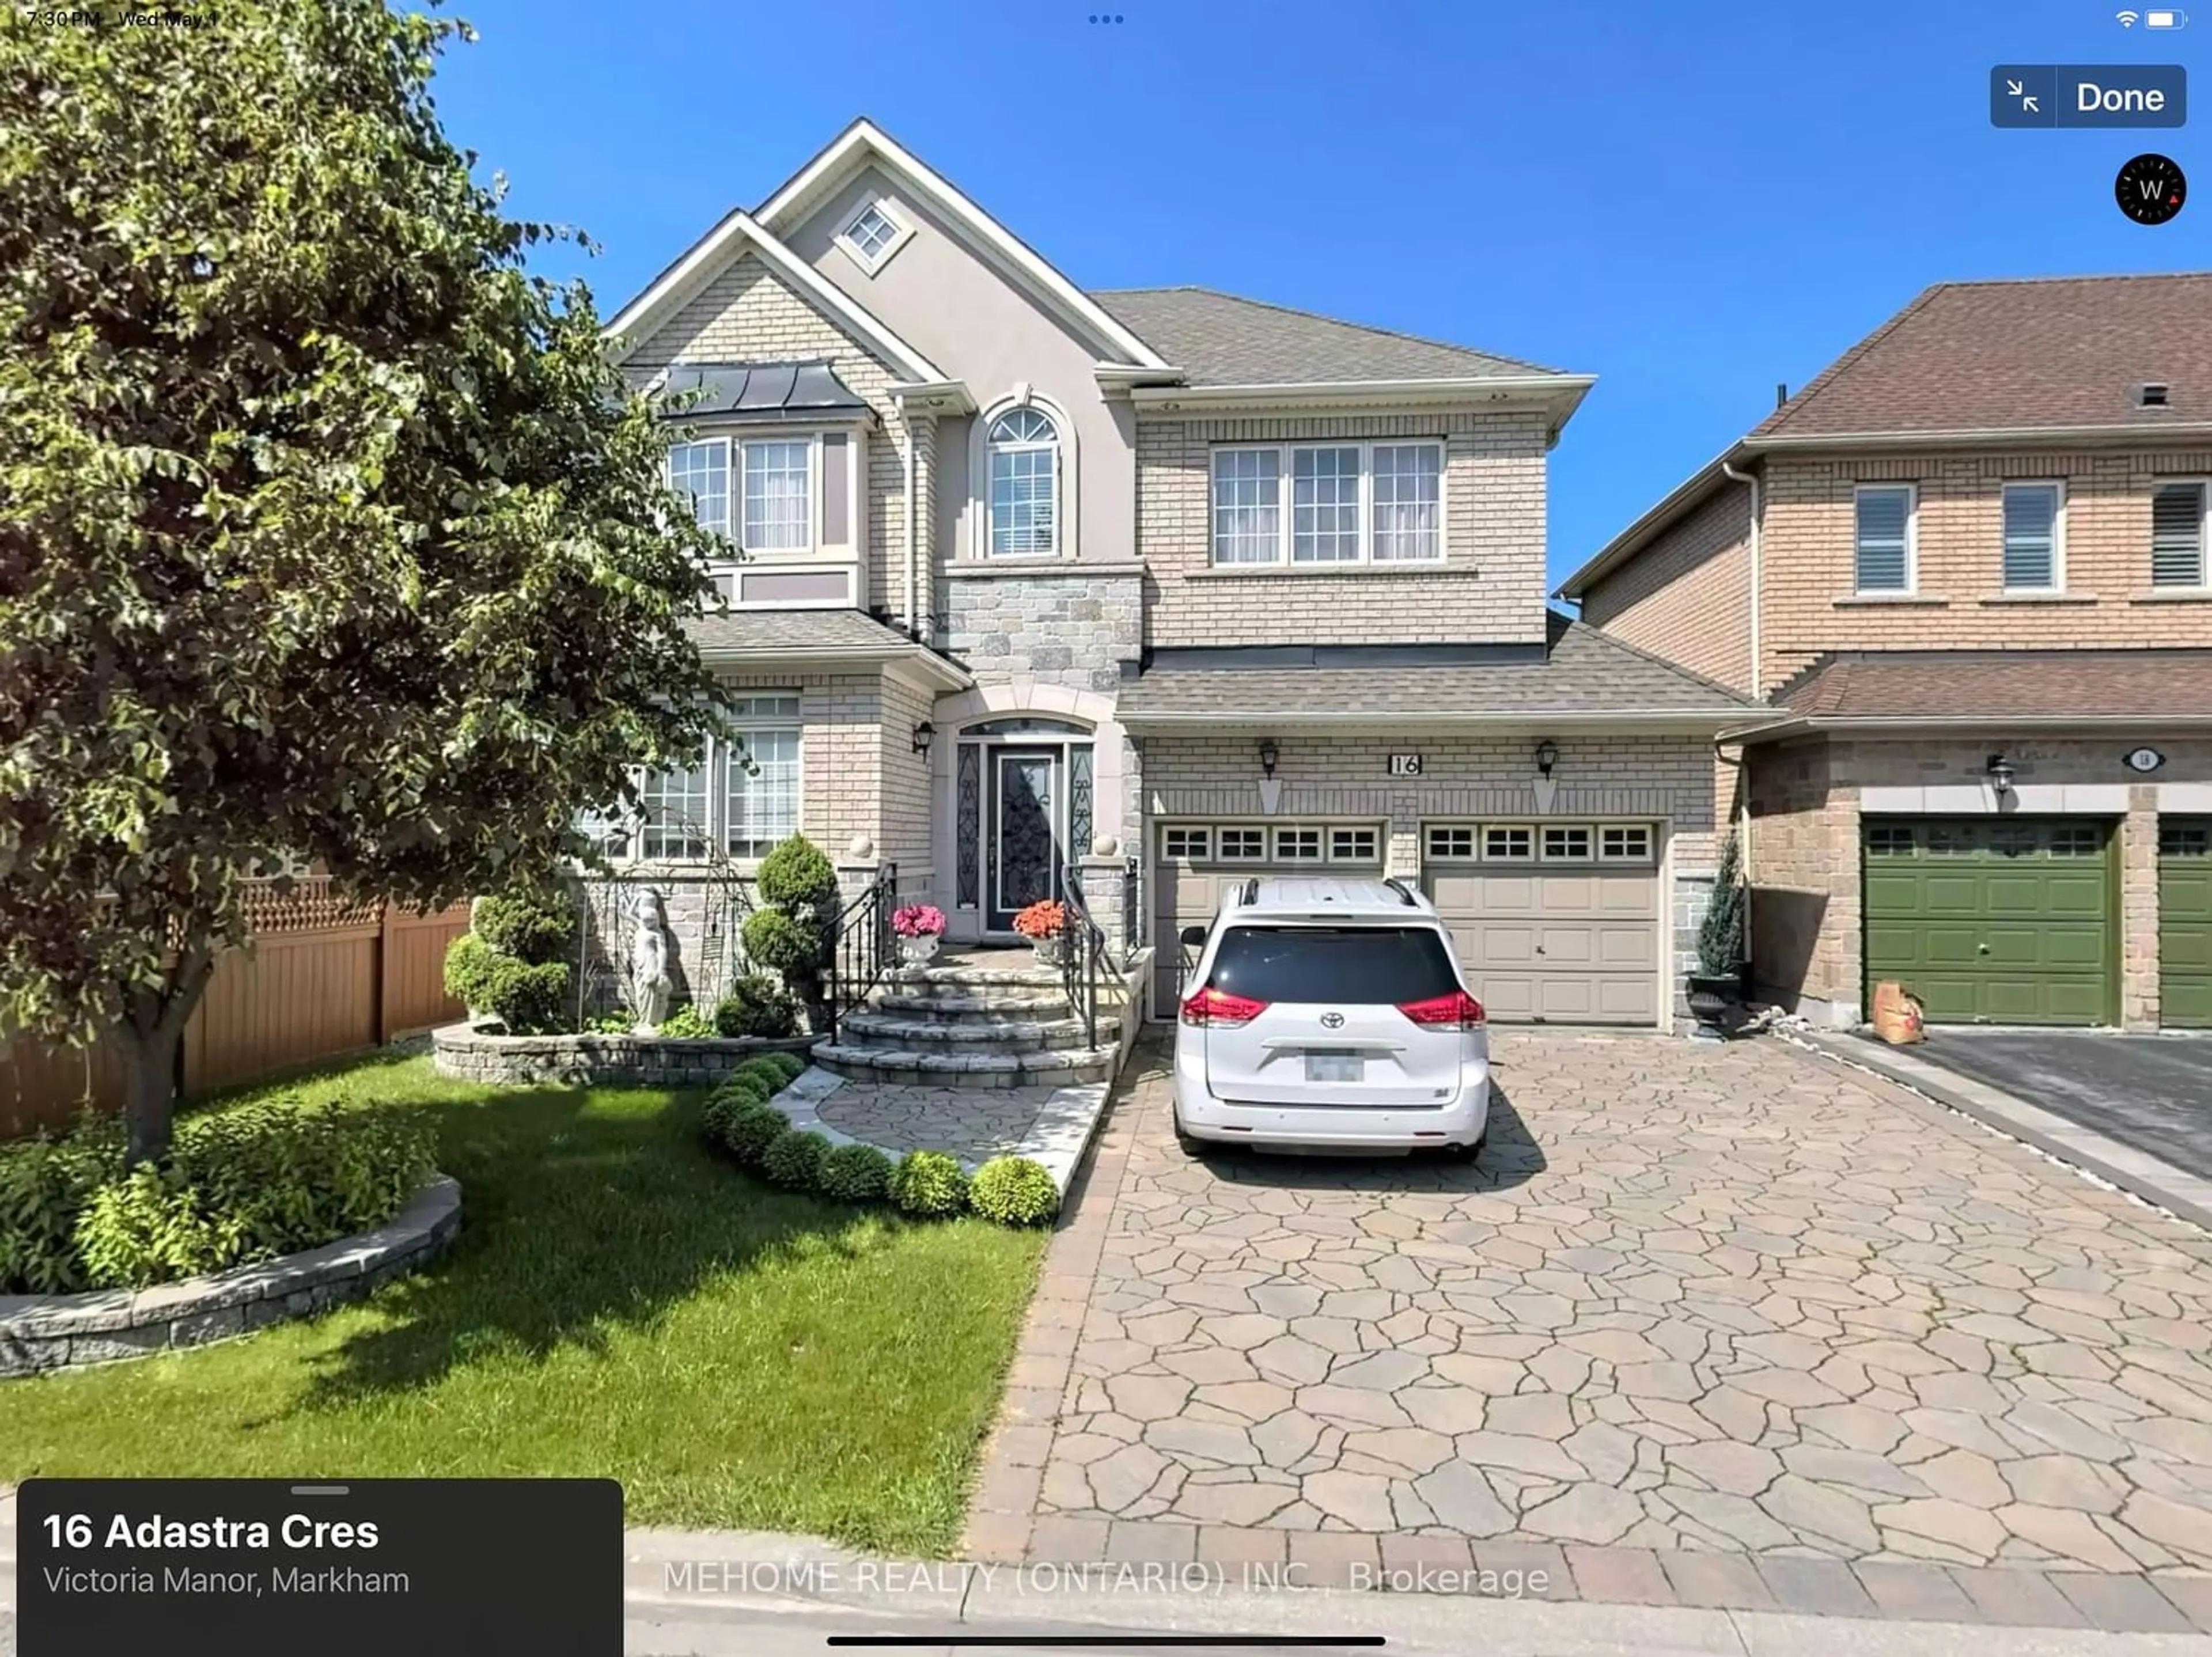 Frontside or backside of a home for 16 Adastra Cres, Markham Ontario L6C 3G8